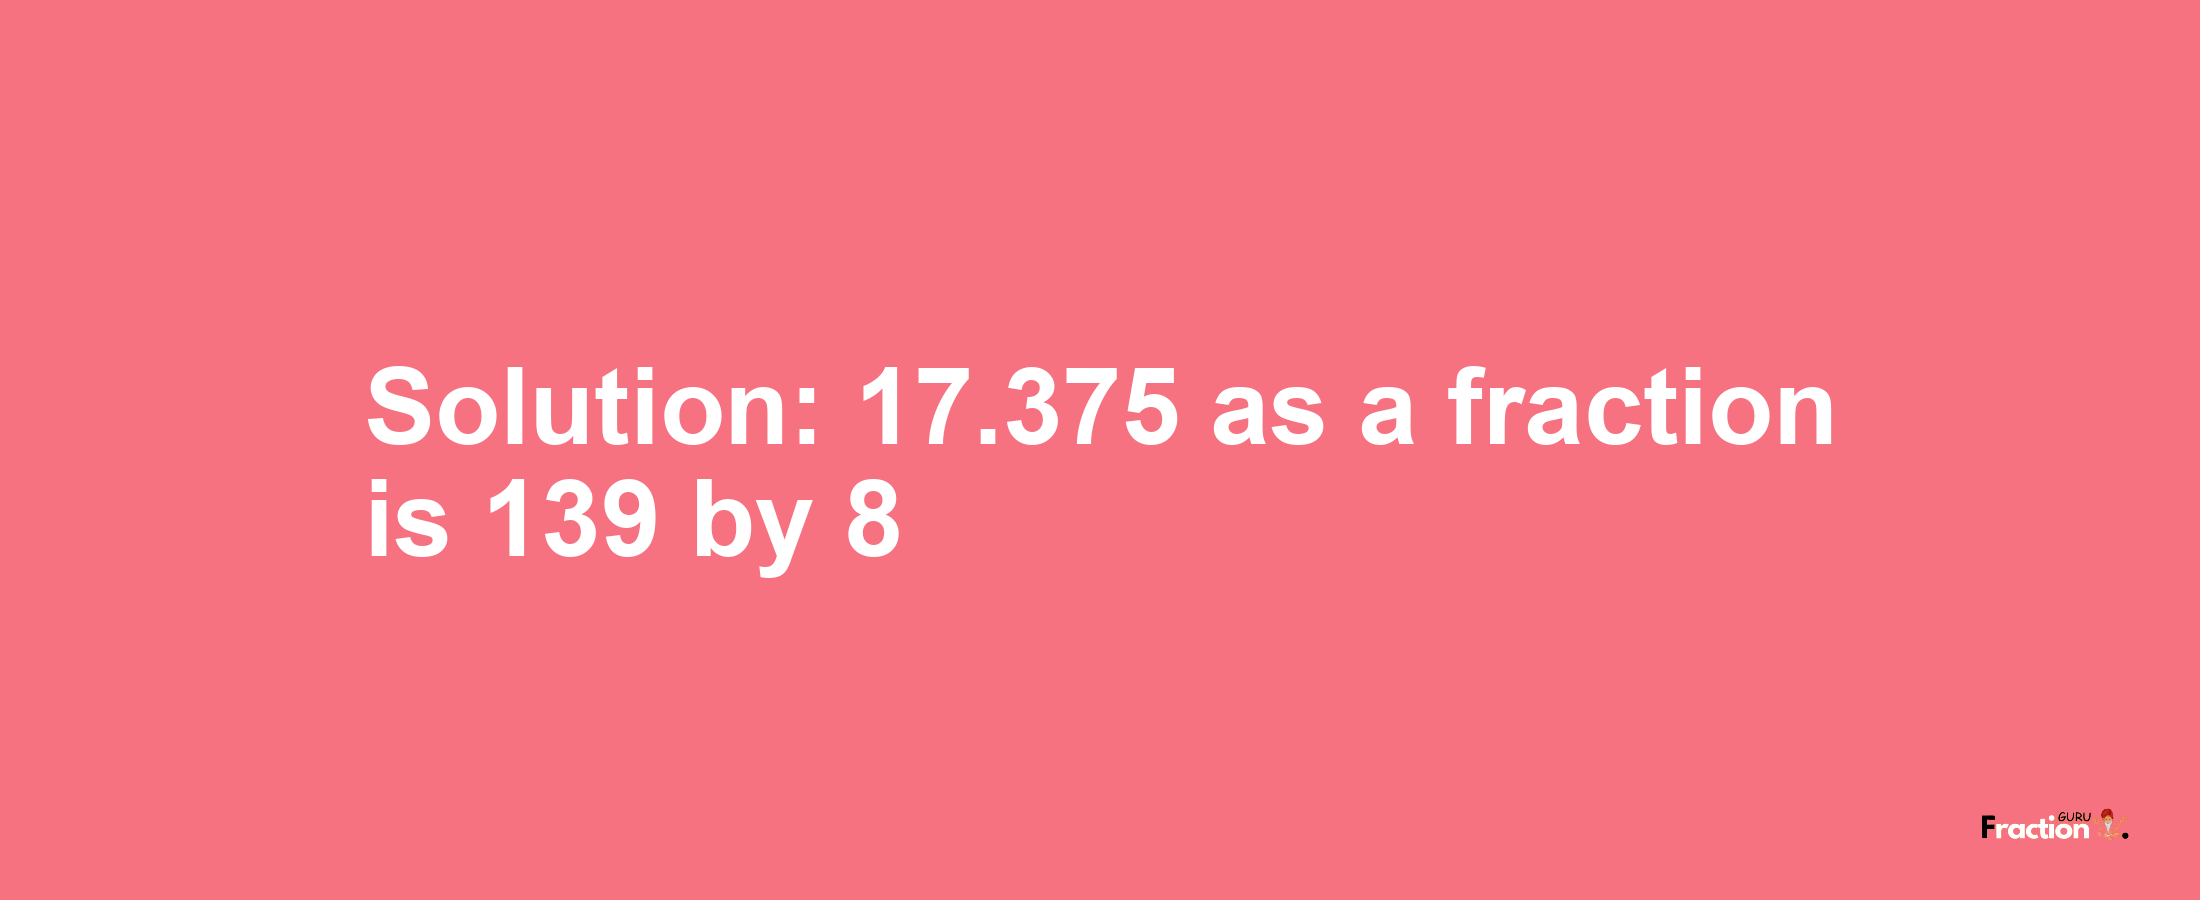 Solution:17.375 as a fraction is 139/8